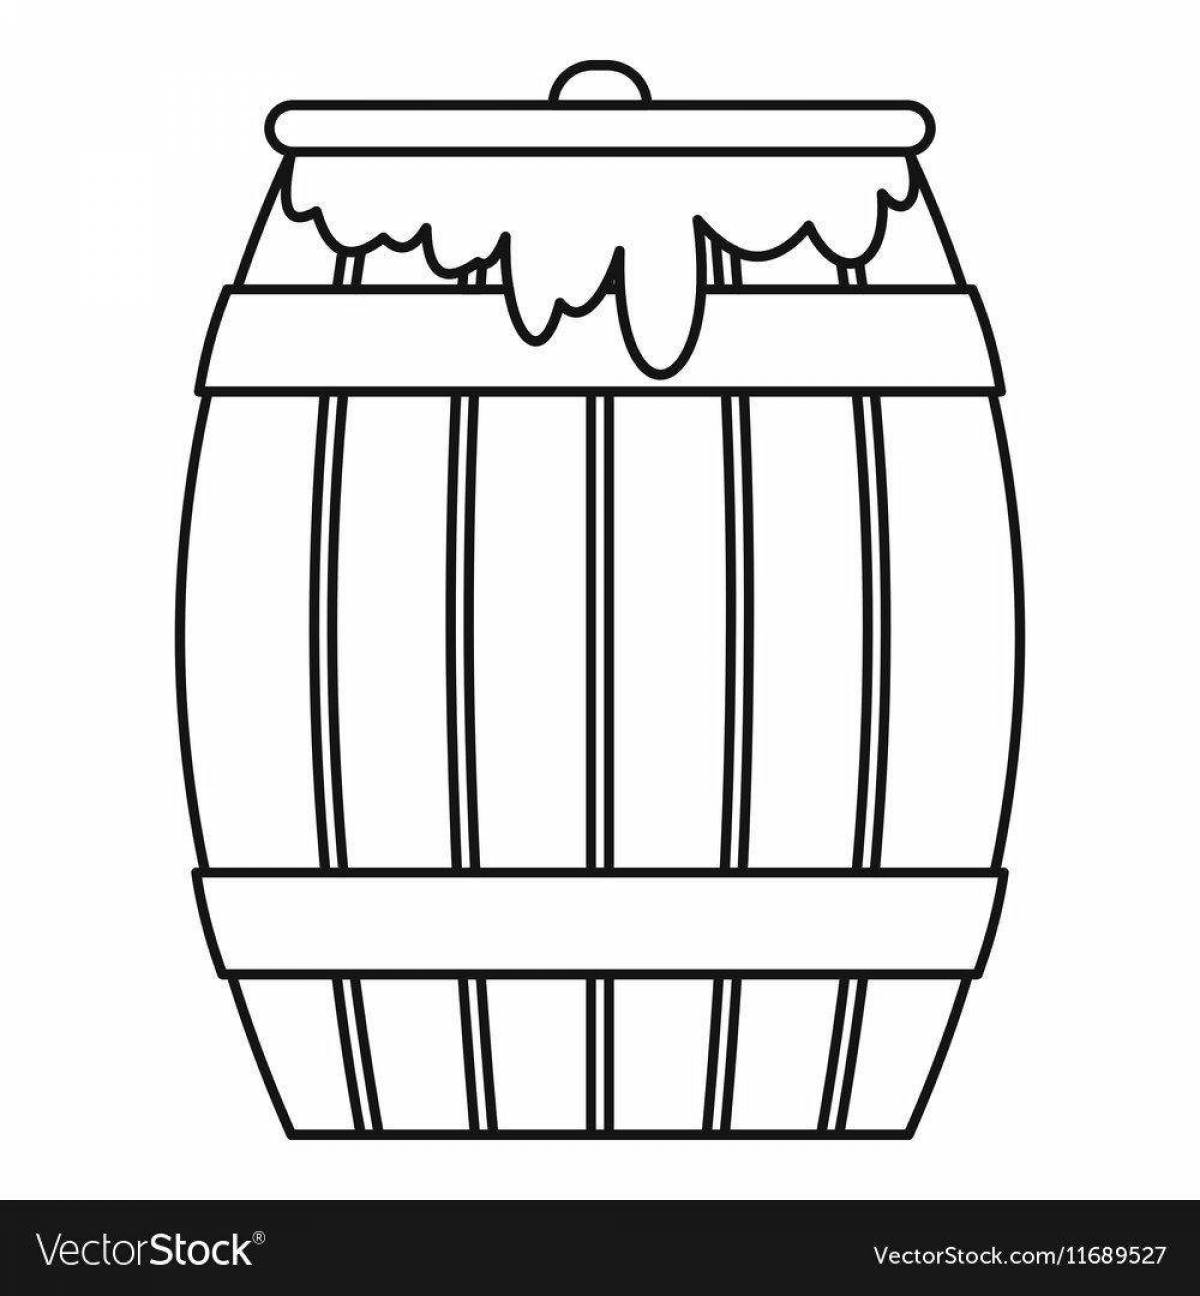 Colourful barrel coloring book for children